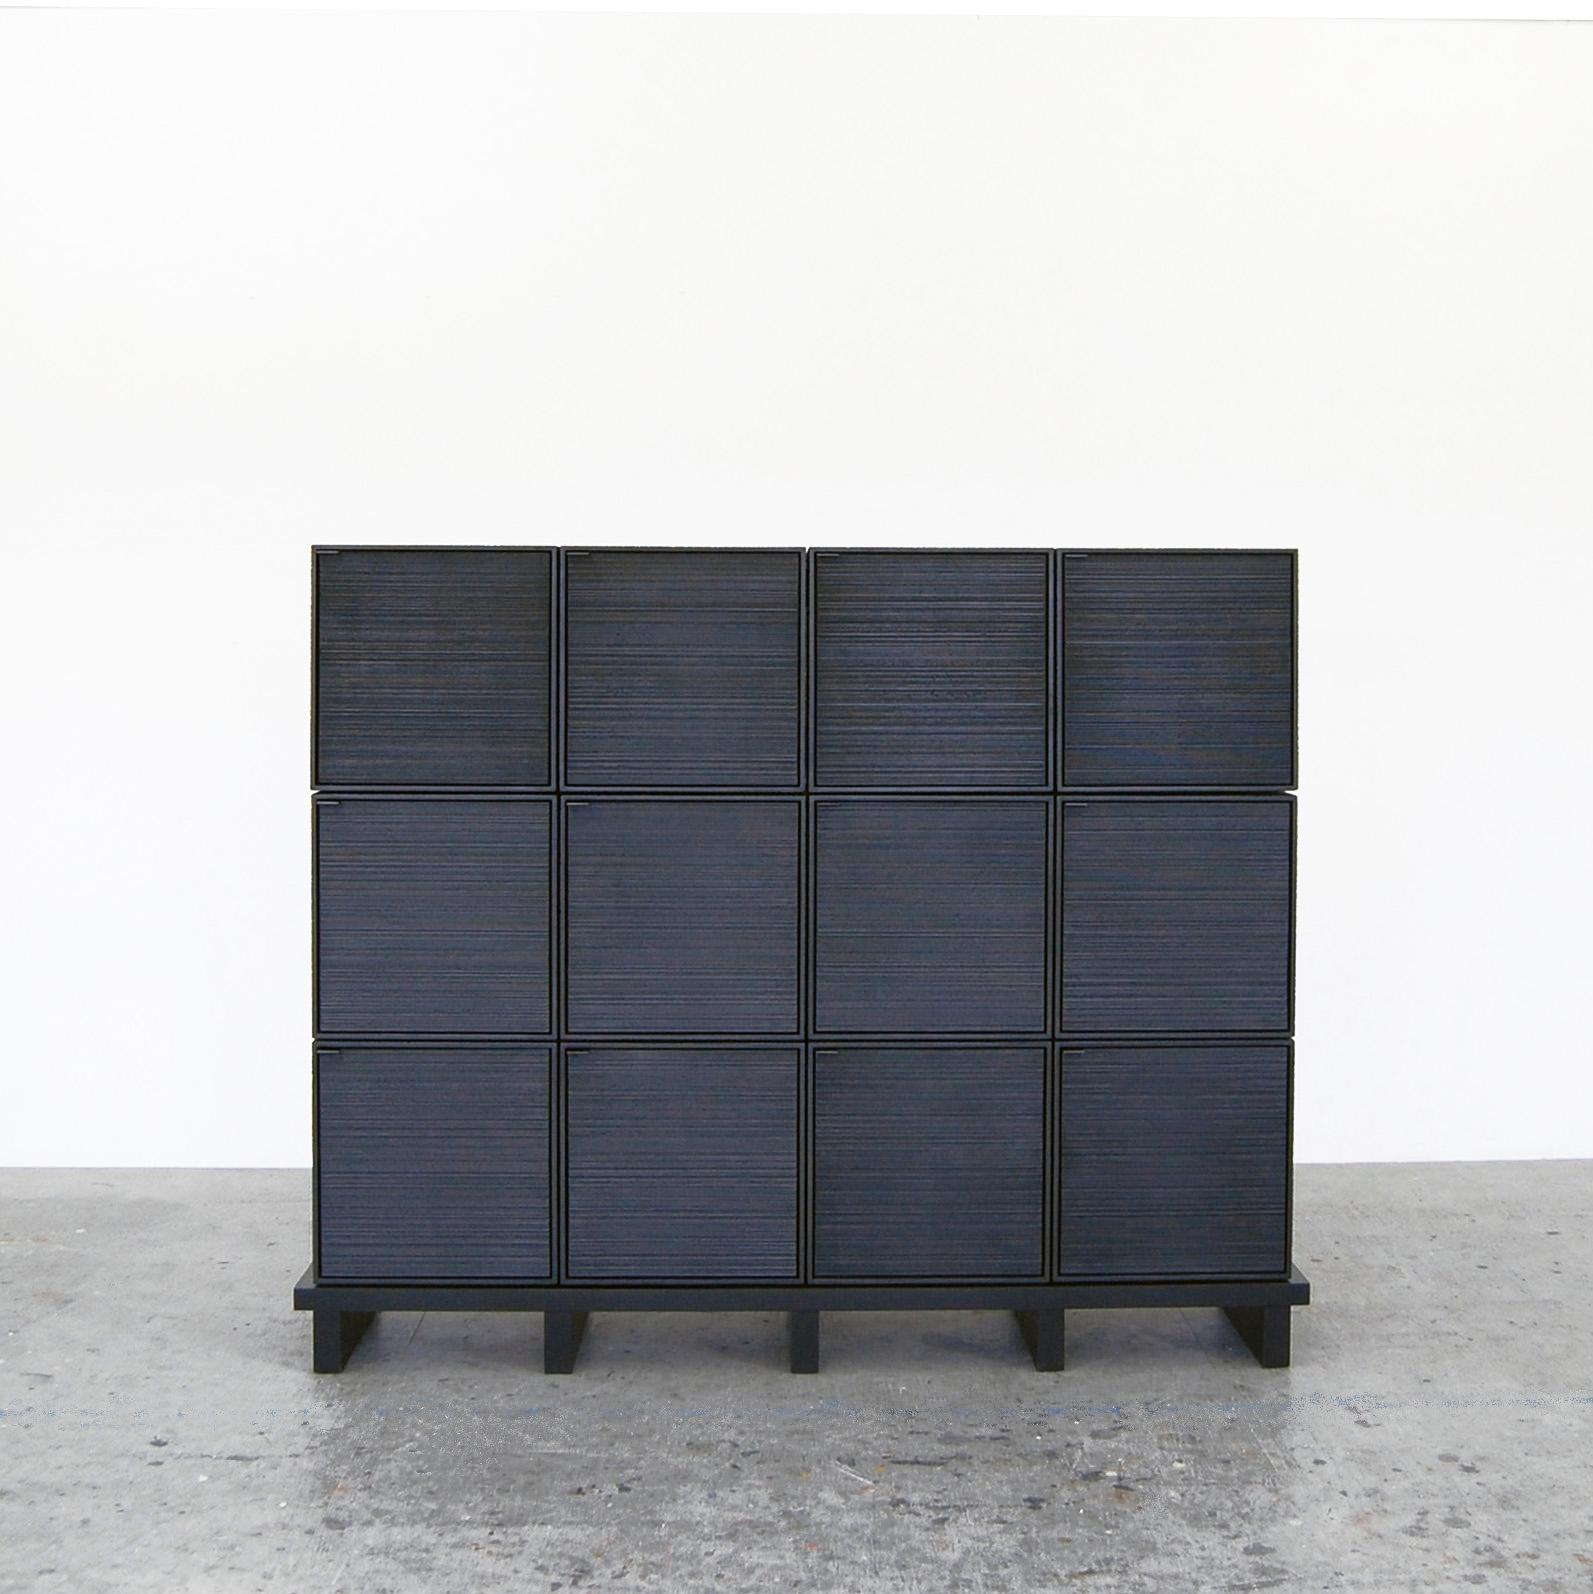 12 Cubes cabinet by John Eric Byers
Dimensions: D 150 x W 38 x H 122 cm
Materials: sawn + blackened + maple + brass

All works are individually handmade to order.

John Eric Byers creates geometrically inspired pieces that are minimal, emotional,